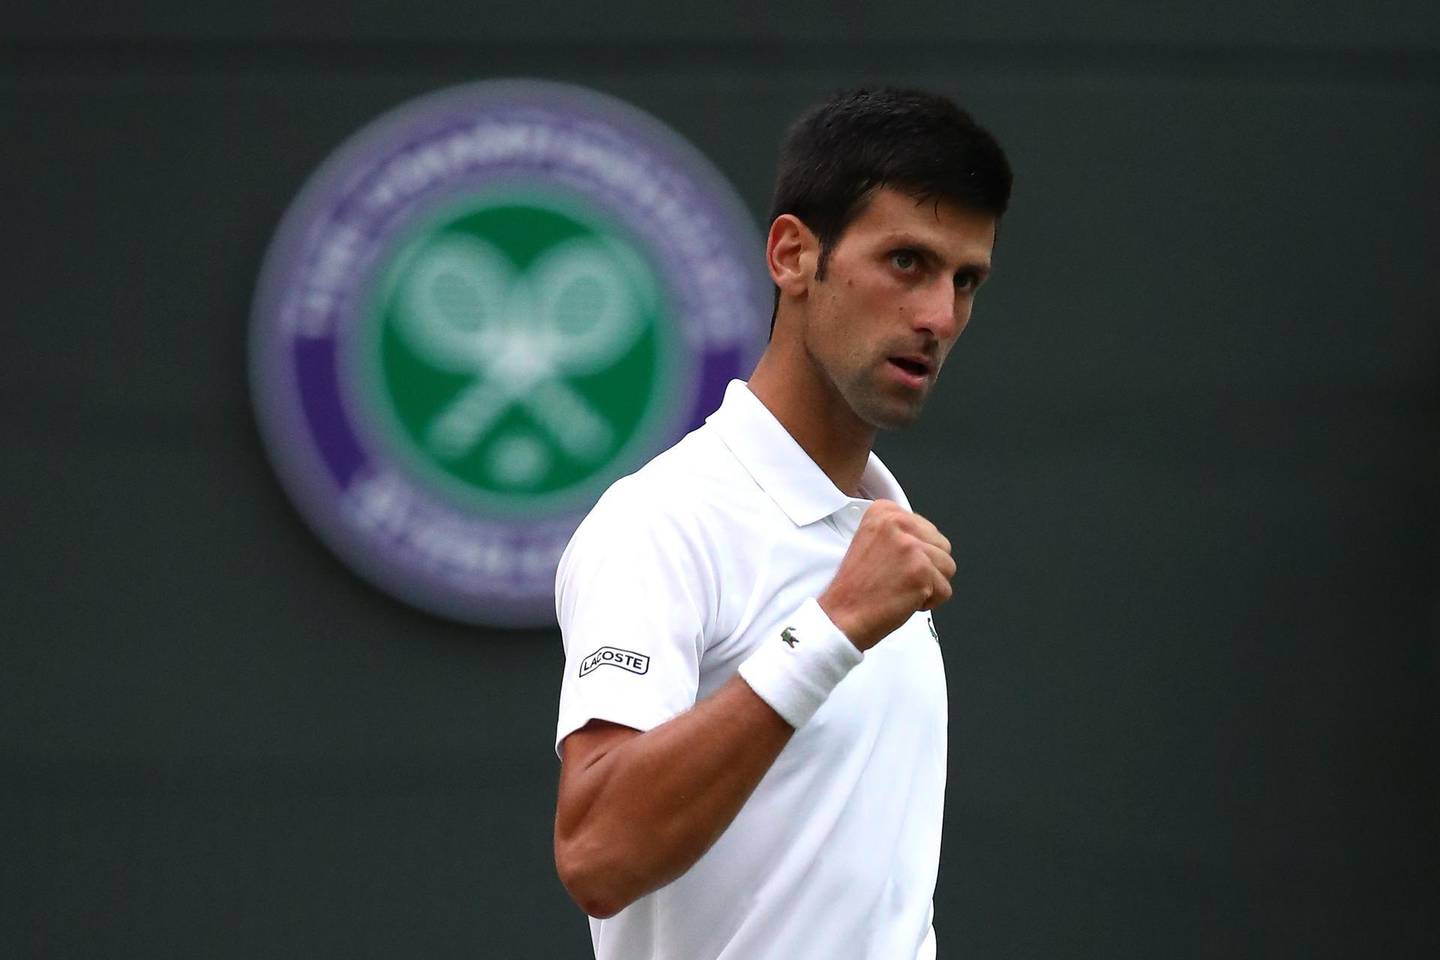 LONDON, ENGLAND - JULY 09:  Novak Djokovic of Serbia celebrates match point against Karen Khachanov of Russia during their Men's Singles fourth round match on day seven of the Wimbledon Lawn Tennis Championships at All England Lawn Tennis and Croquet Club on July 9, 2018 in London, England.  (Photo by Clive Brunskill/Getty Images)